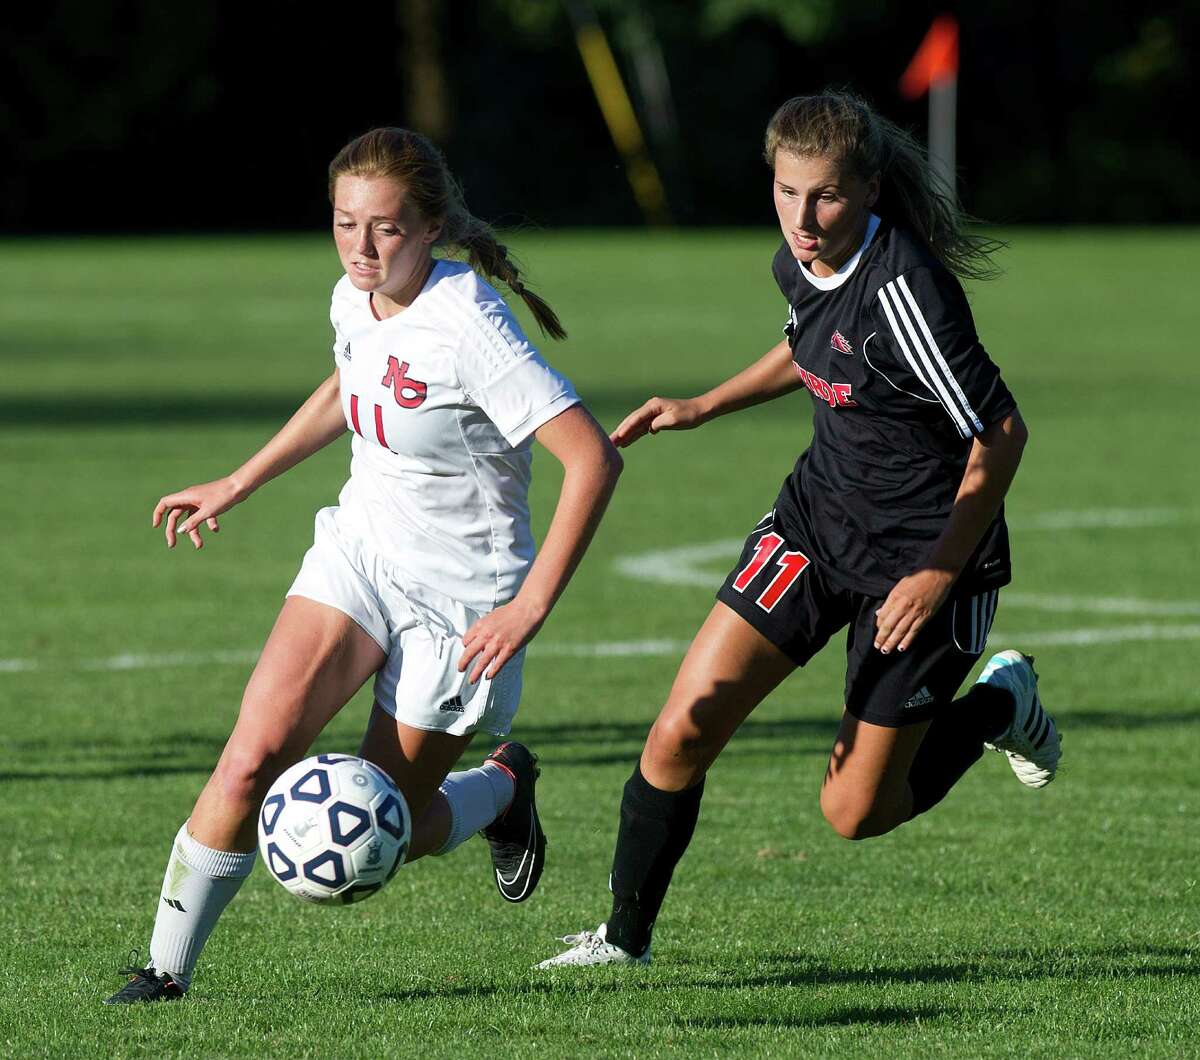 New Canaan's Kelly McClymonds, left, and Fairfield Warde's Hannah Allen, right, compete for control of the ball during a girls soccer game in New Canaan on Friday, Sept. 26.